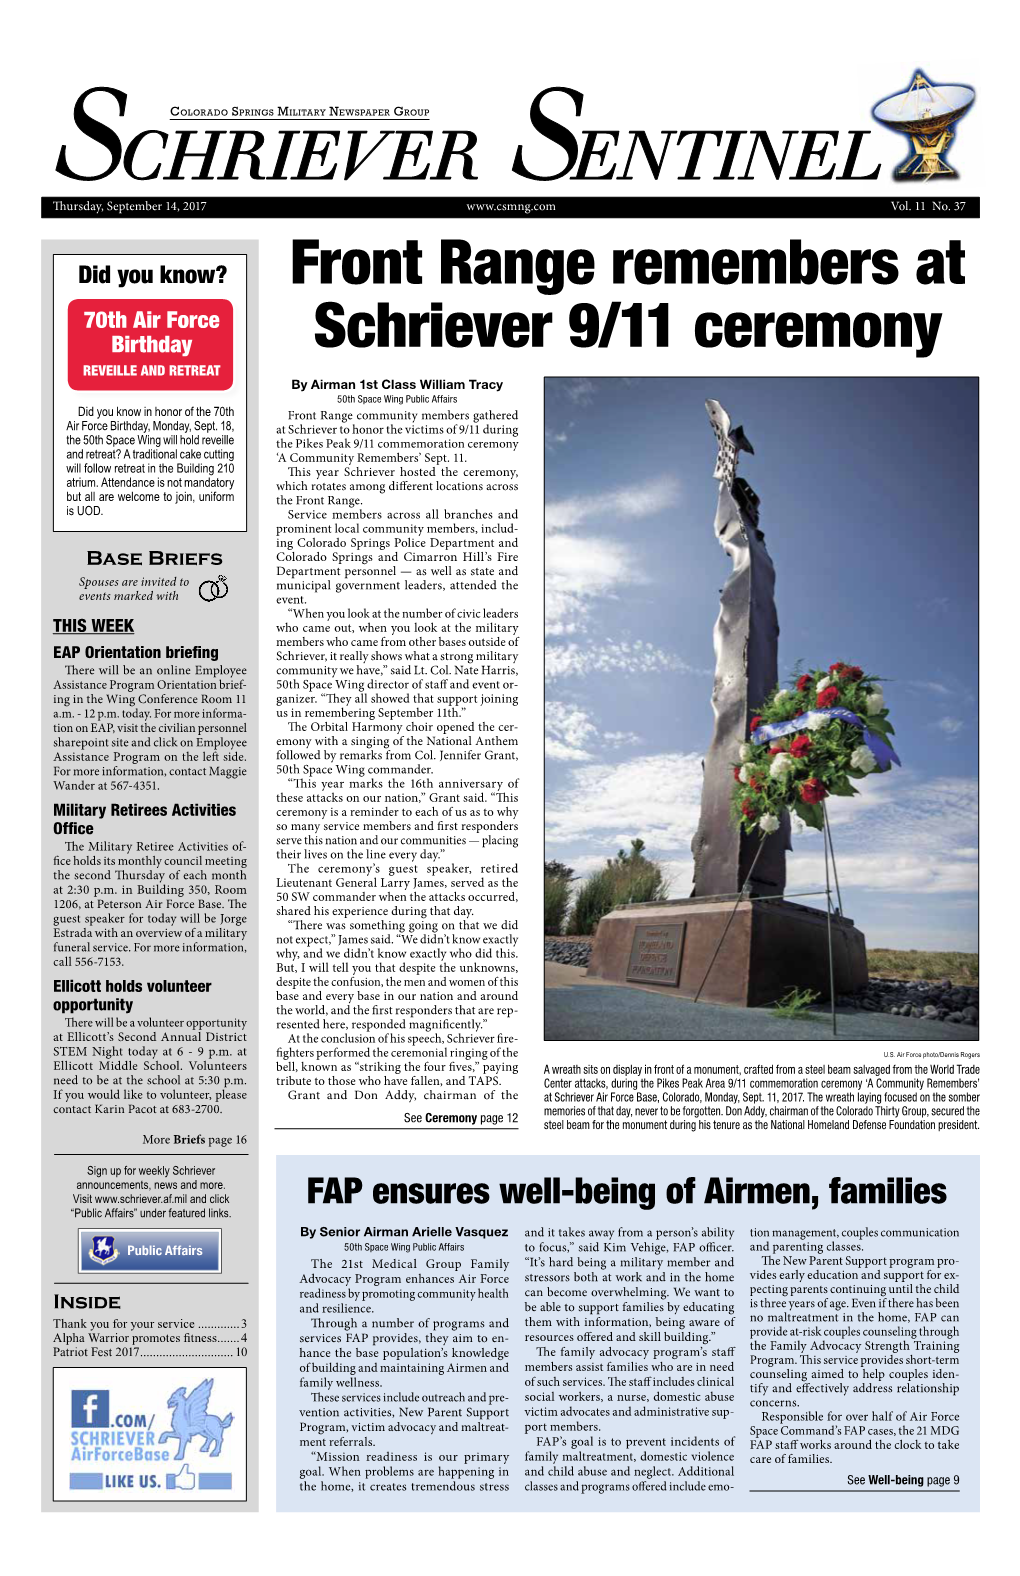 Front Range Remembers at Schriever 9/11 Ceremony